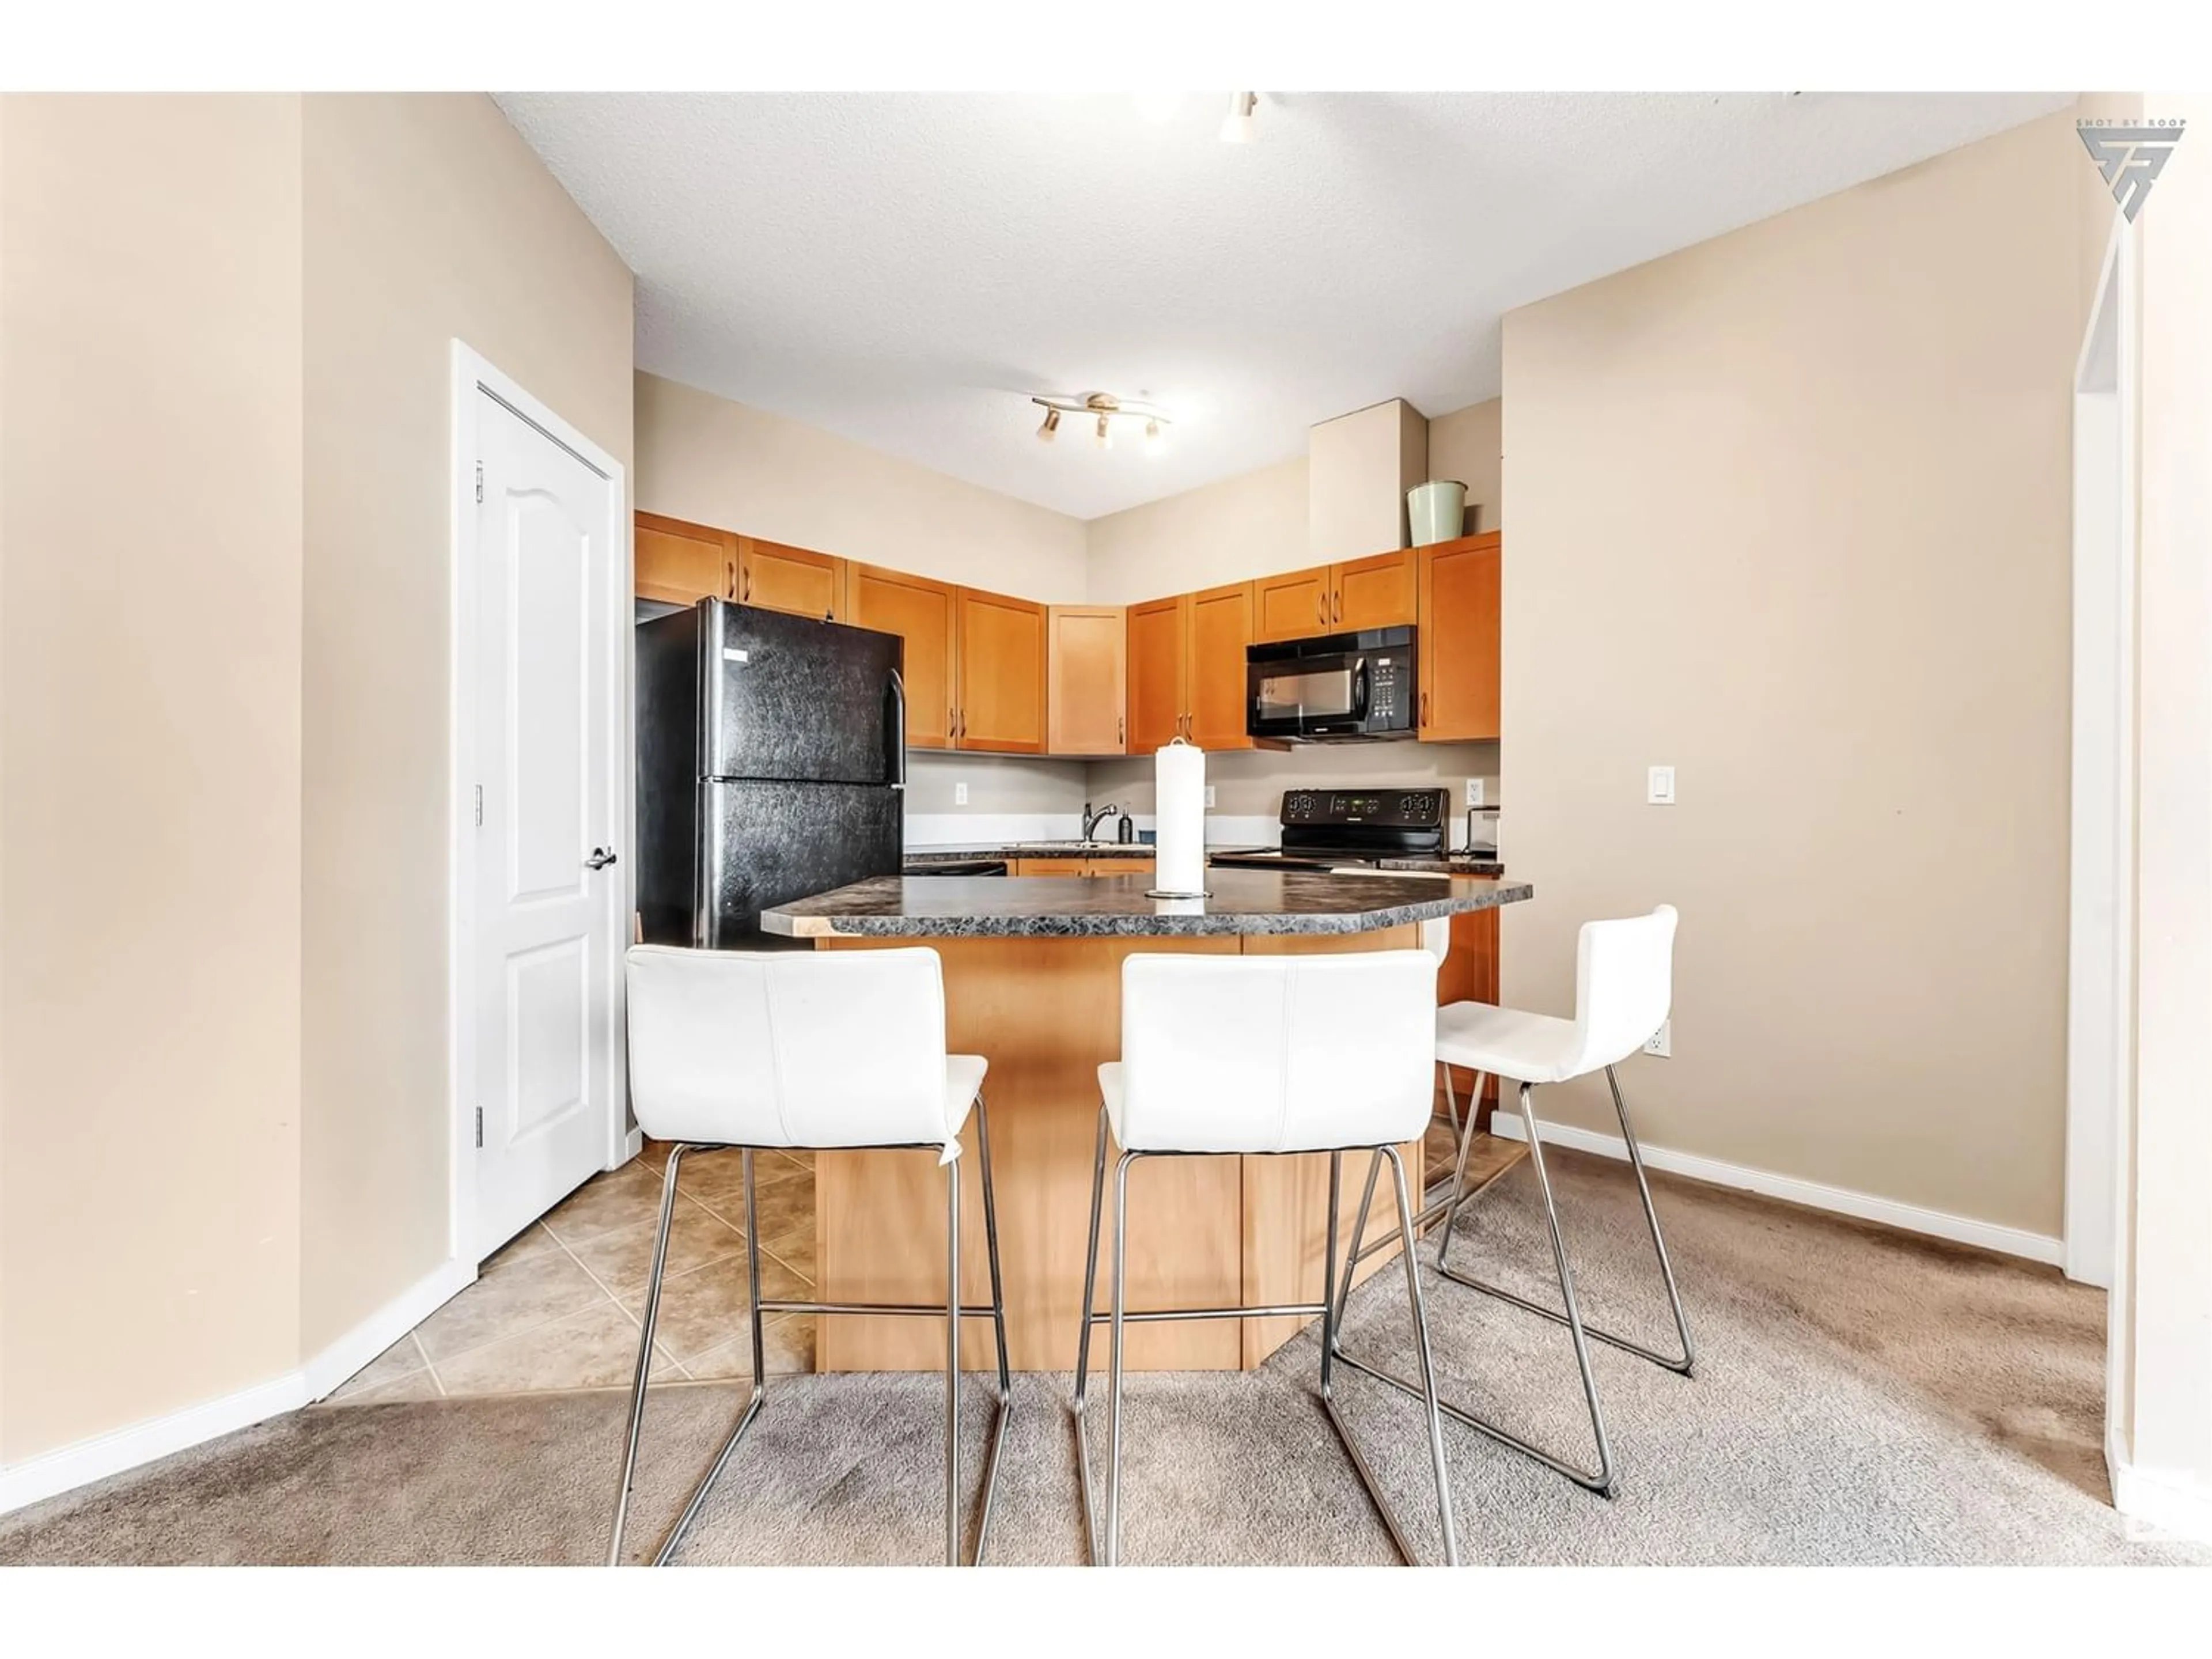 Standard kitchen for #418 392 SILVER BERRY RD NW, Edmonton Alberta T6T0H1